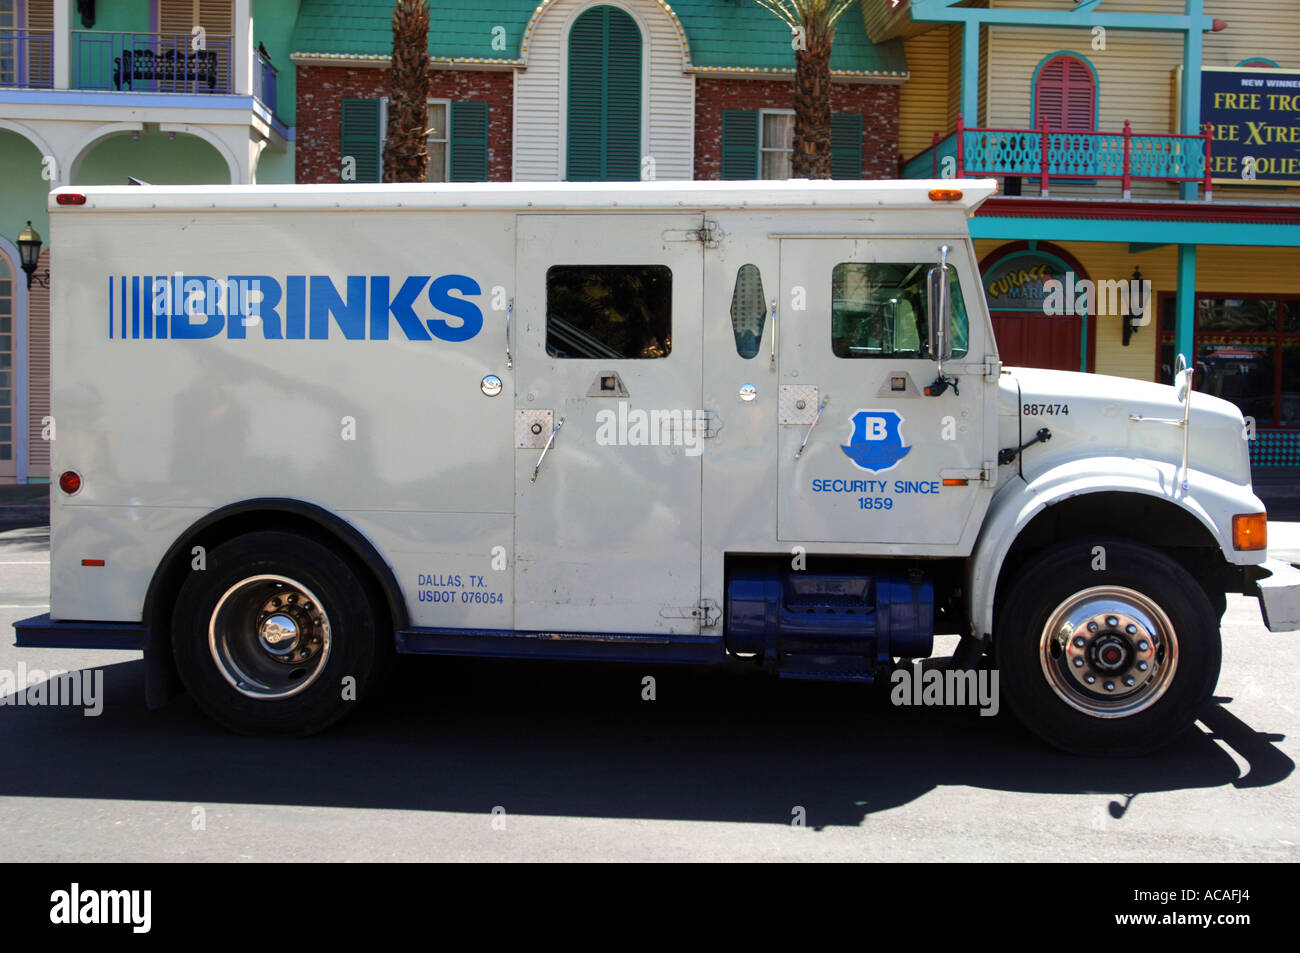 Image result for brinks truck picture